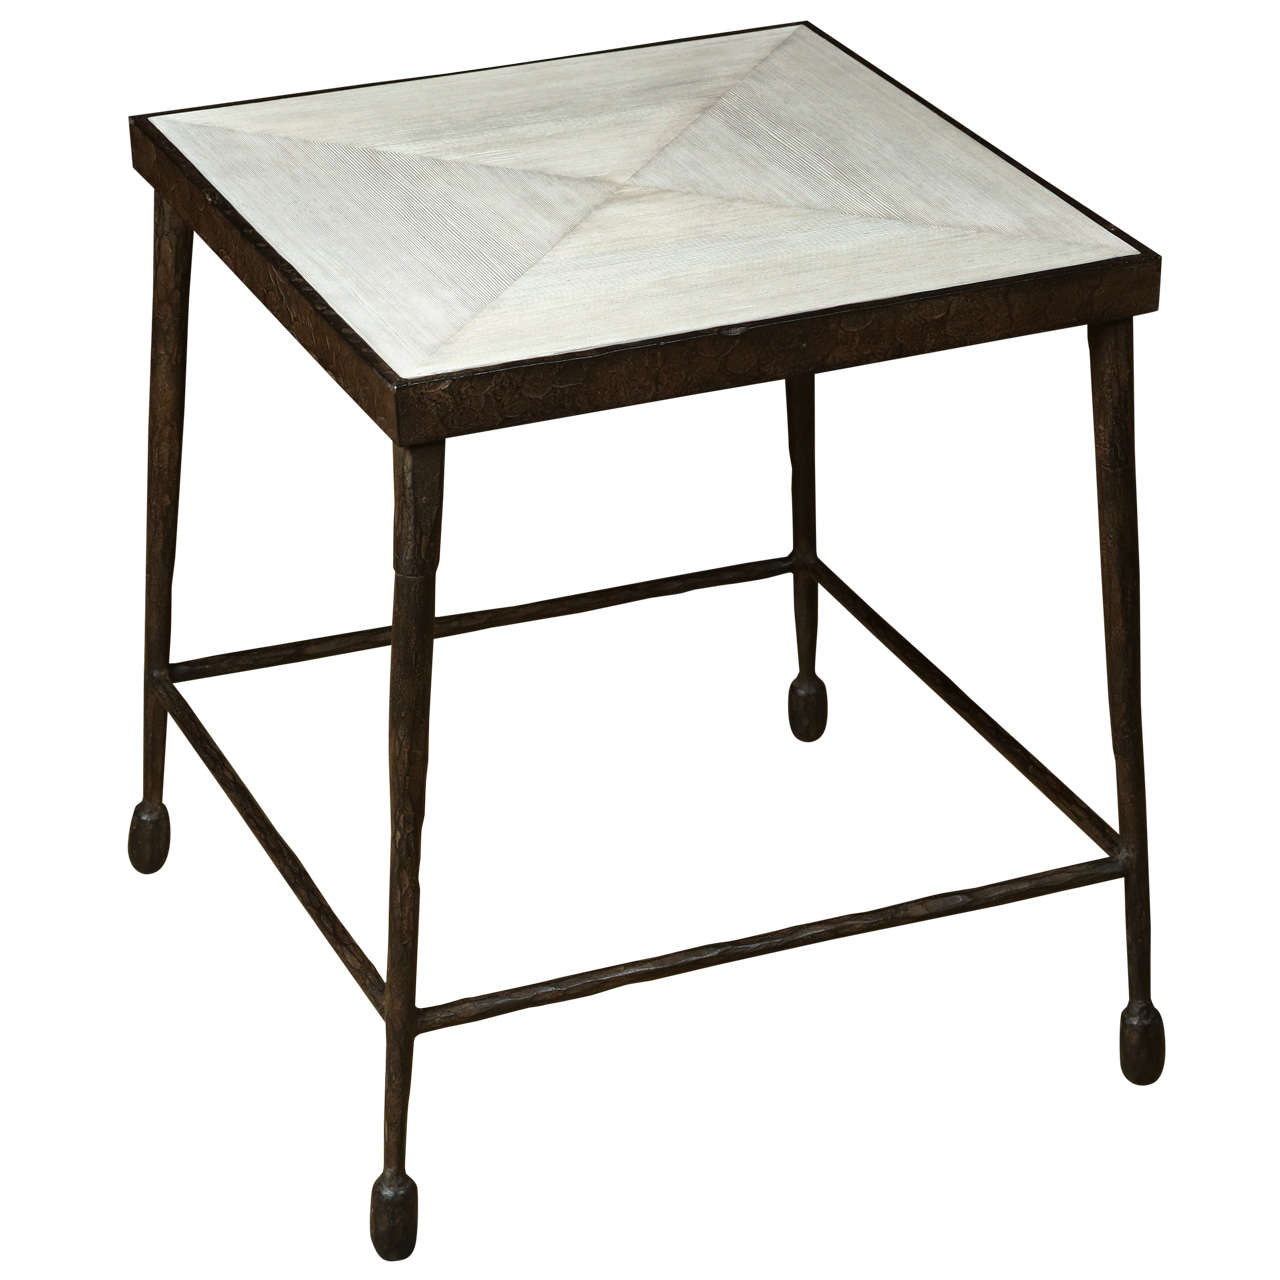 Iron and Douglas Fir Inset Side Table For Sale